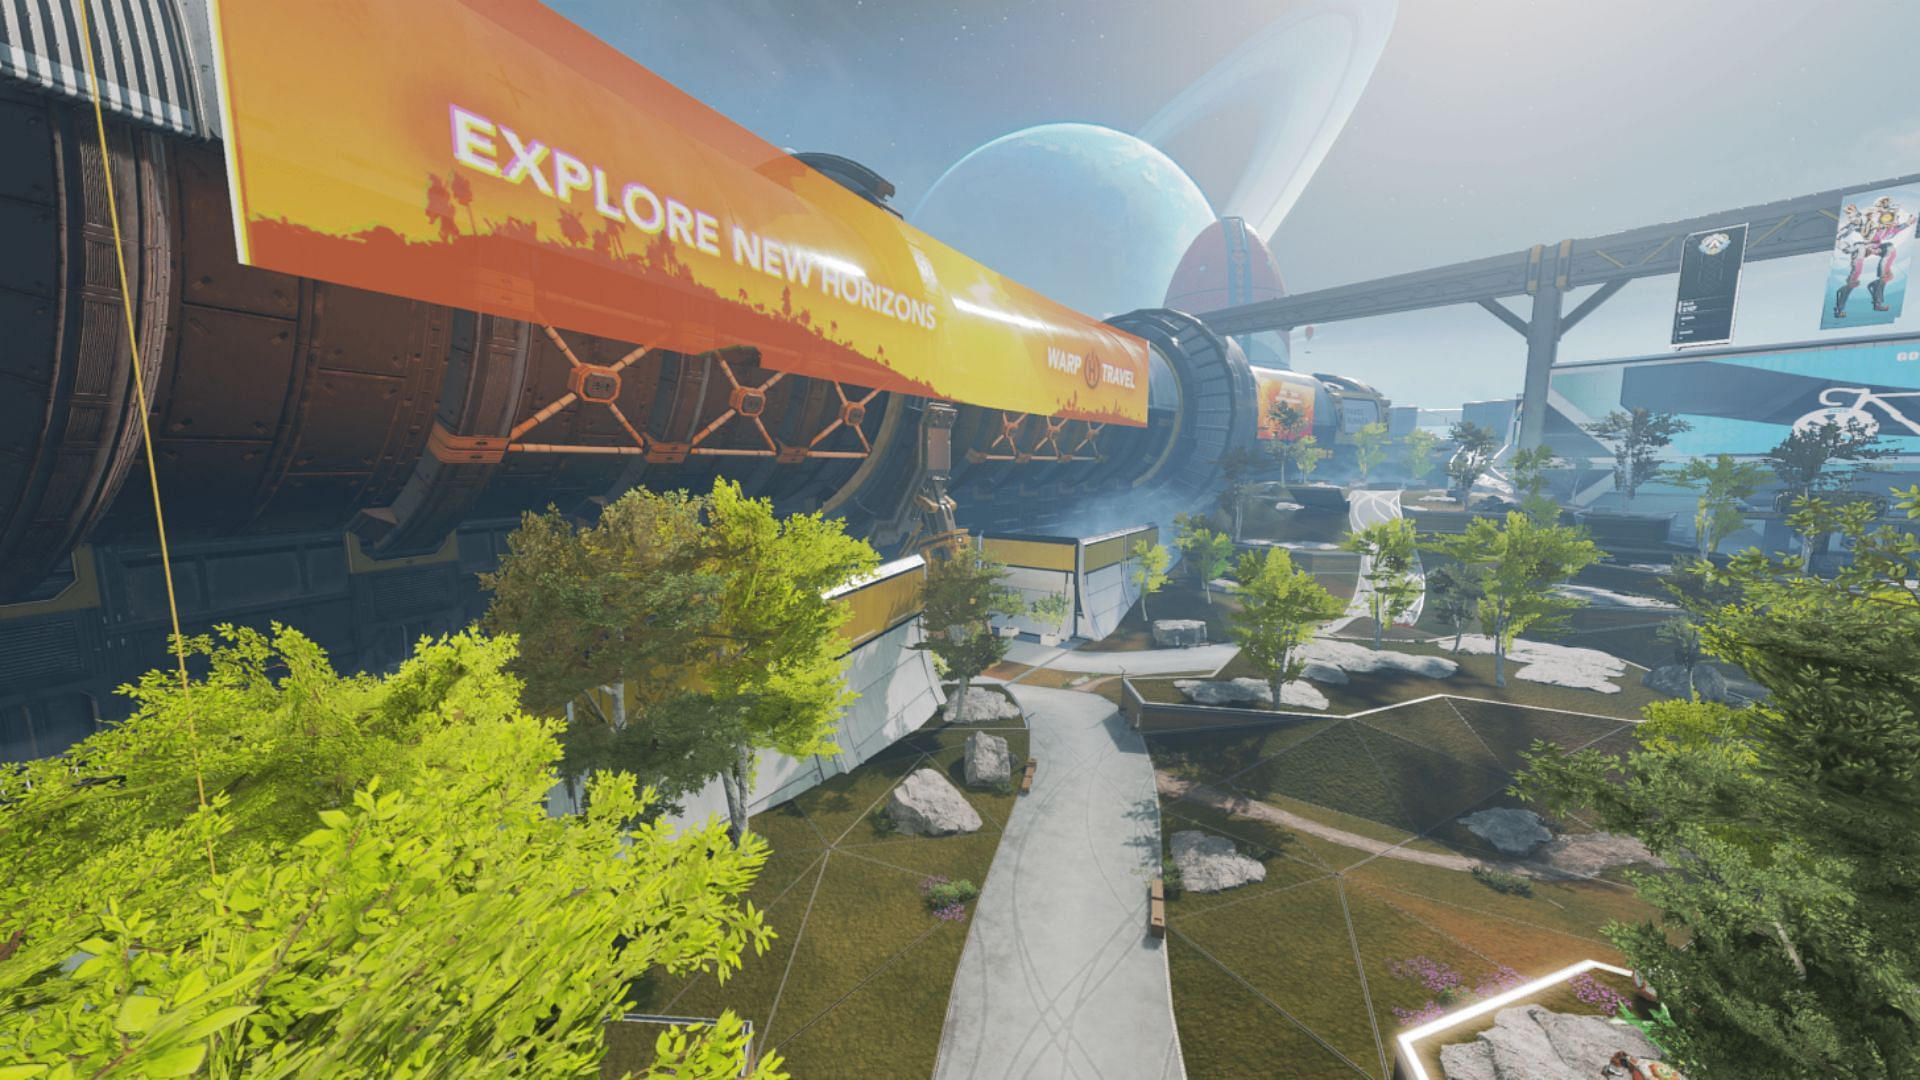 Terminal acts as a new central routing area for the map (Image by Respawn)